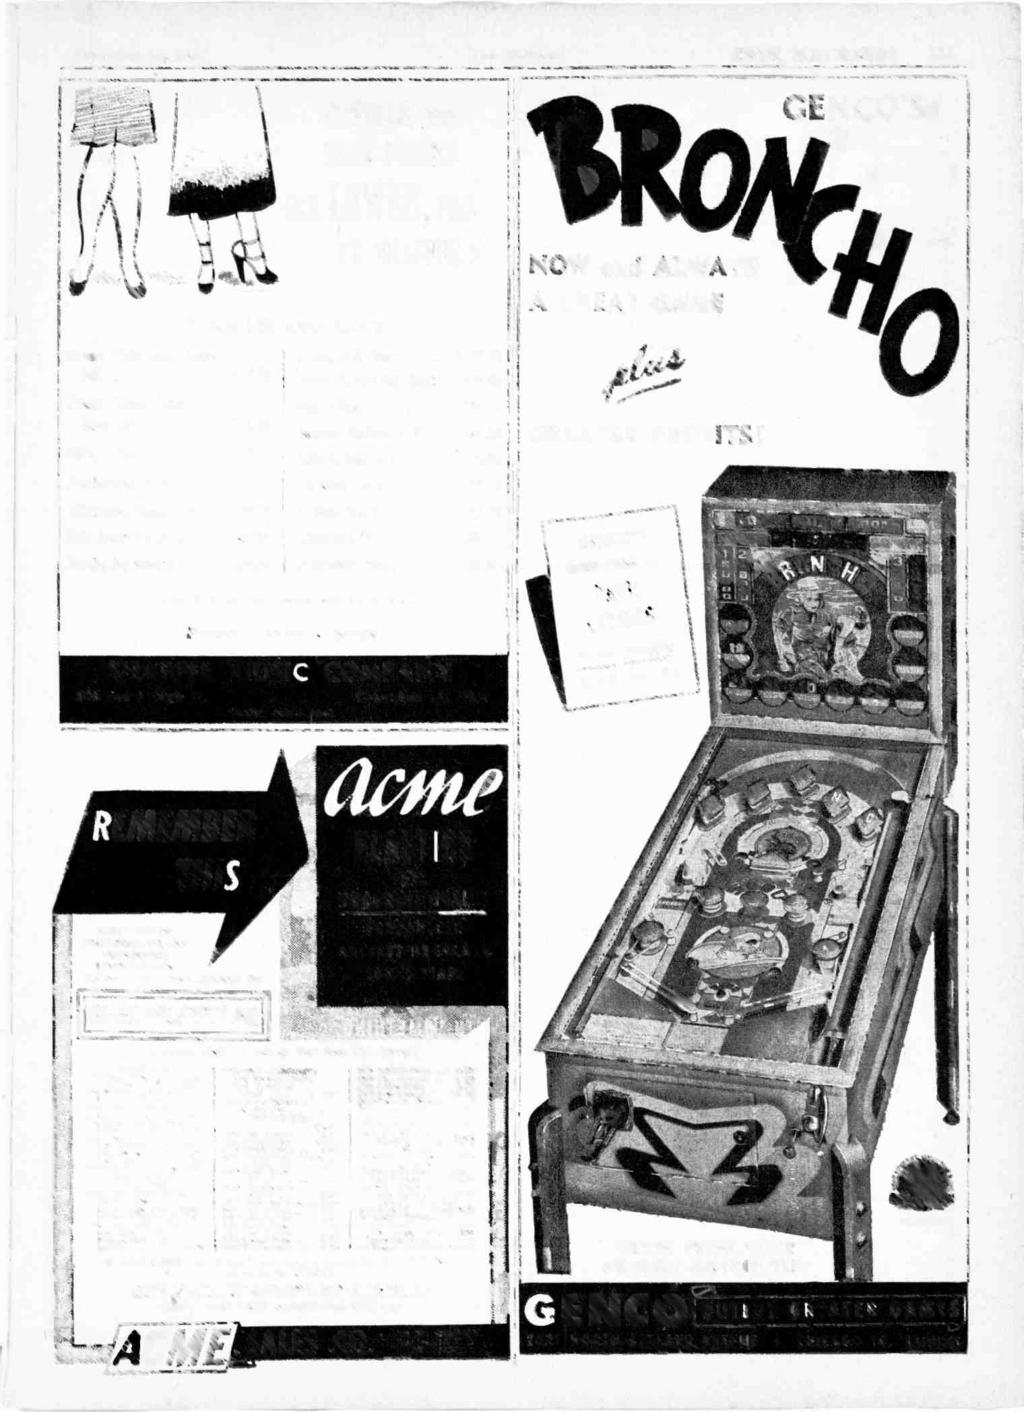 November 15, 1947 The Billboard COIN MACHINES 125 CONSOLE and GENCO'S SLOT PRICES ARE LOWER, TOO......AT SHAFFER'S CONSOLES AND SLOTS Keeney "Twin Super Bonus Keeney Skill Time $ 49.50 Bell" $675.